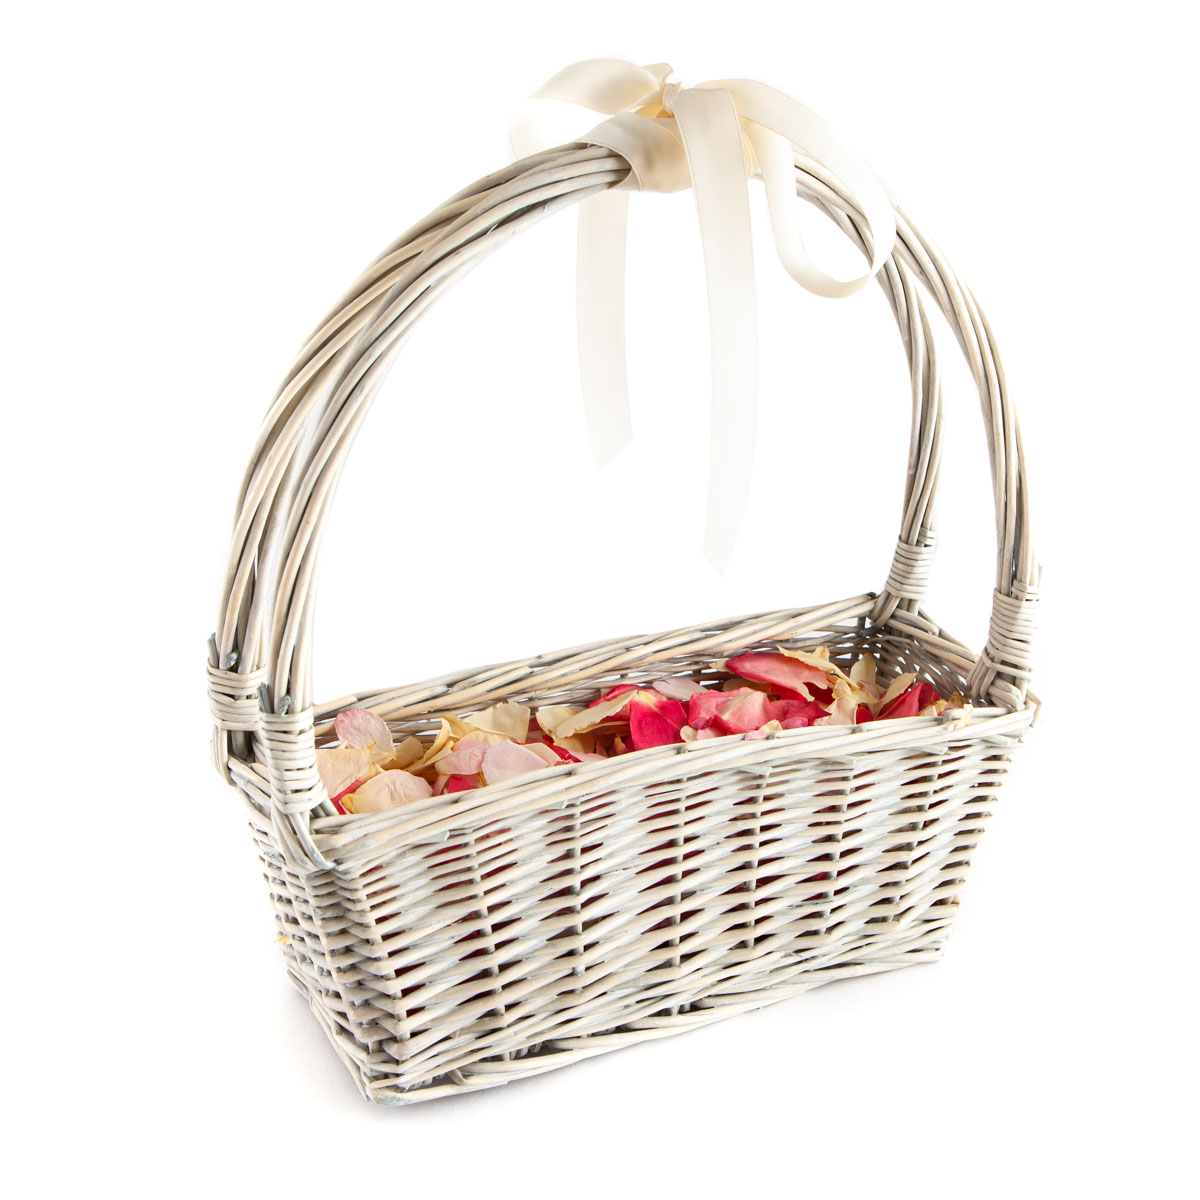 A Small White Basket filled with Rose Petal Confetti